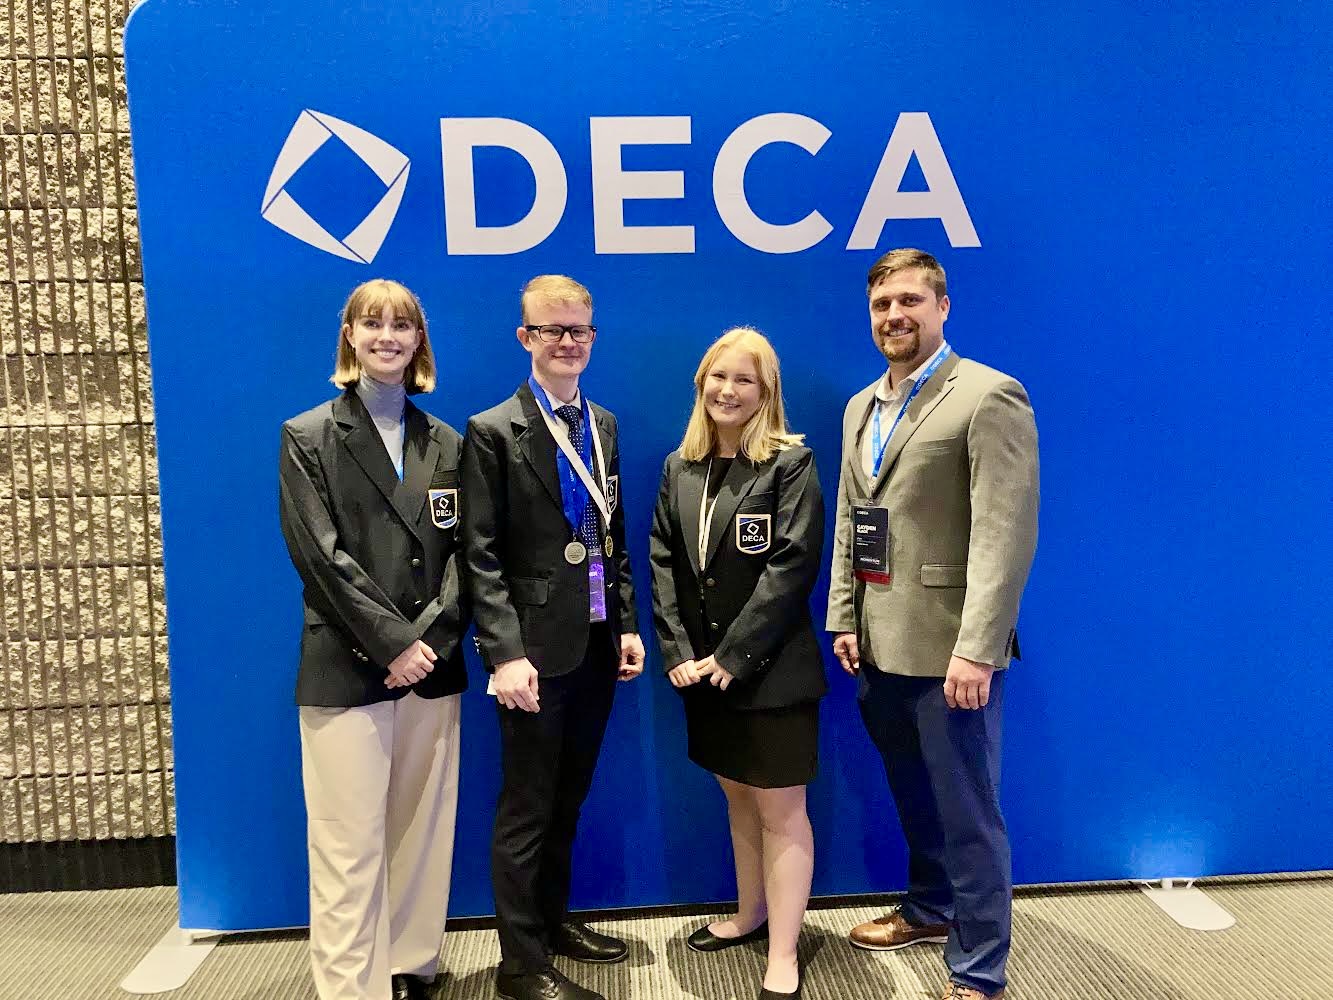 Lillian, Alex, Kaistin, and their advisor Cayden Black pose in front of a large blue wall that says "DECA."